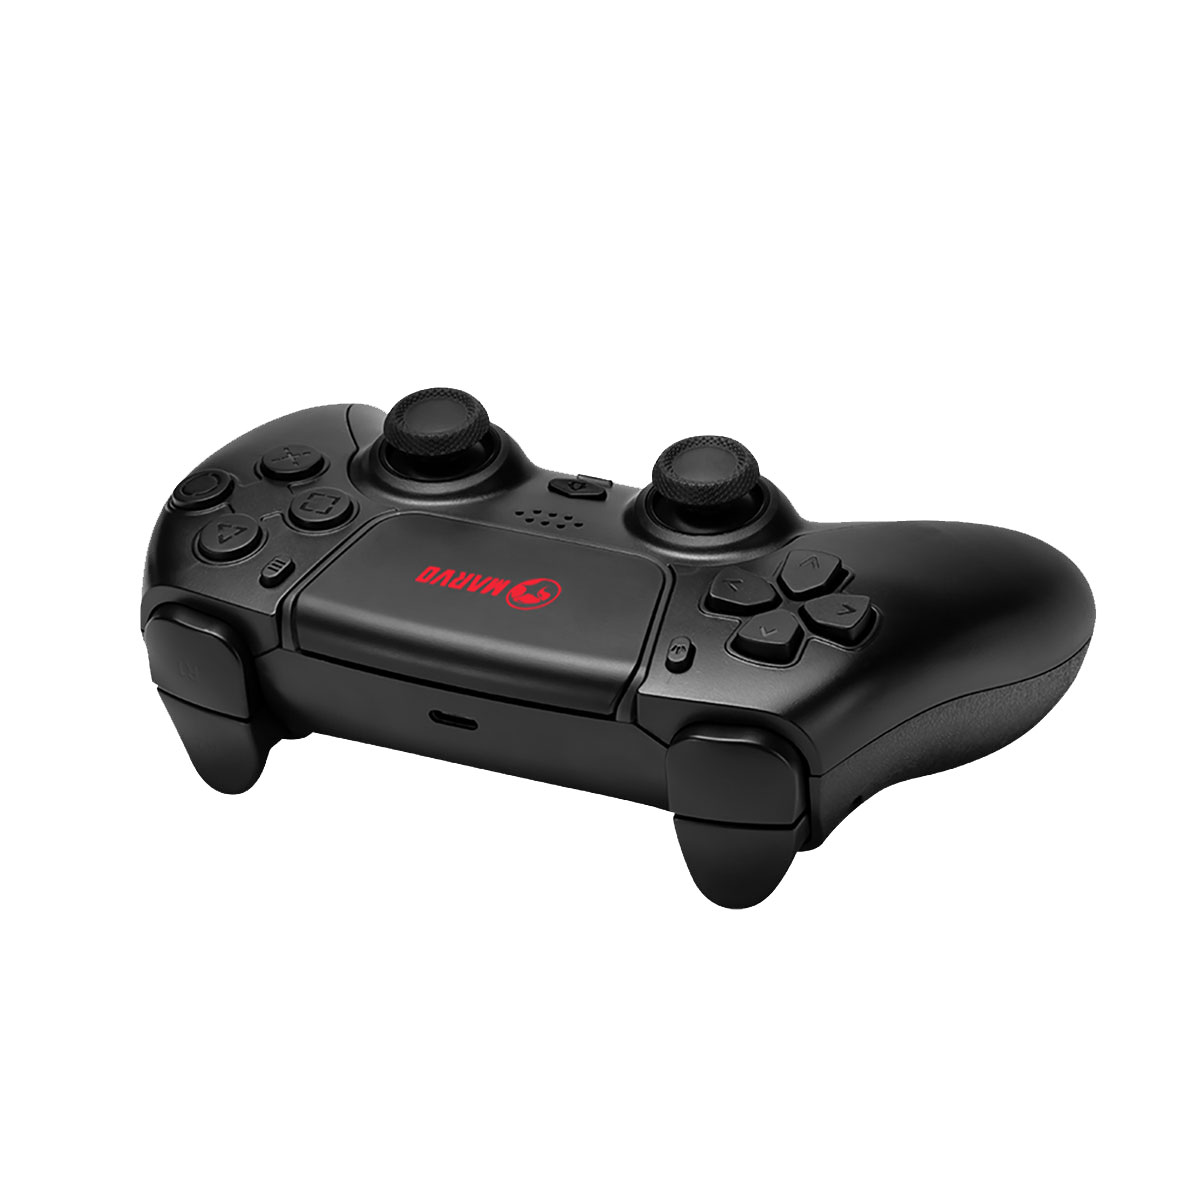 gt-90-wireless-game-controller-05